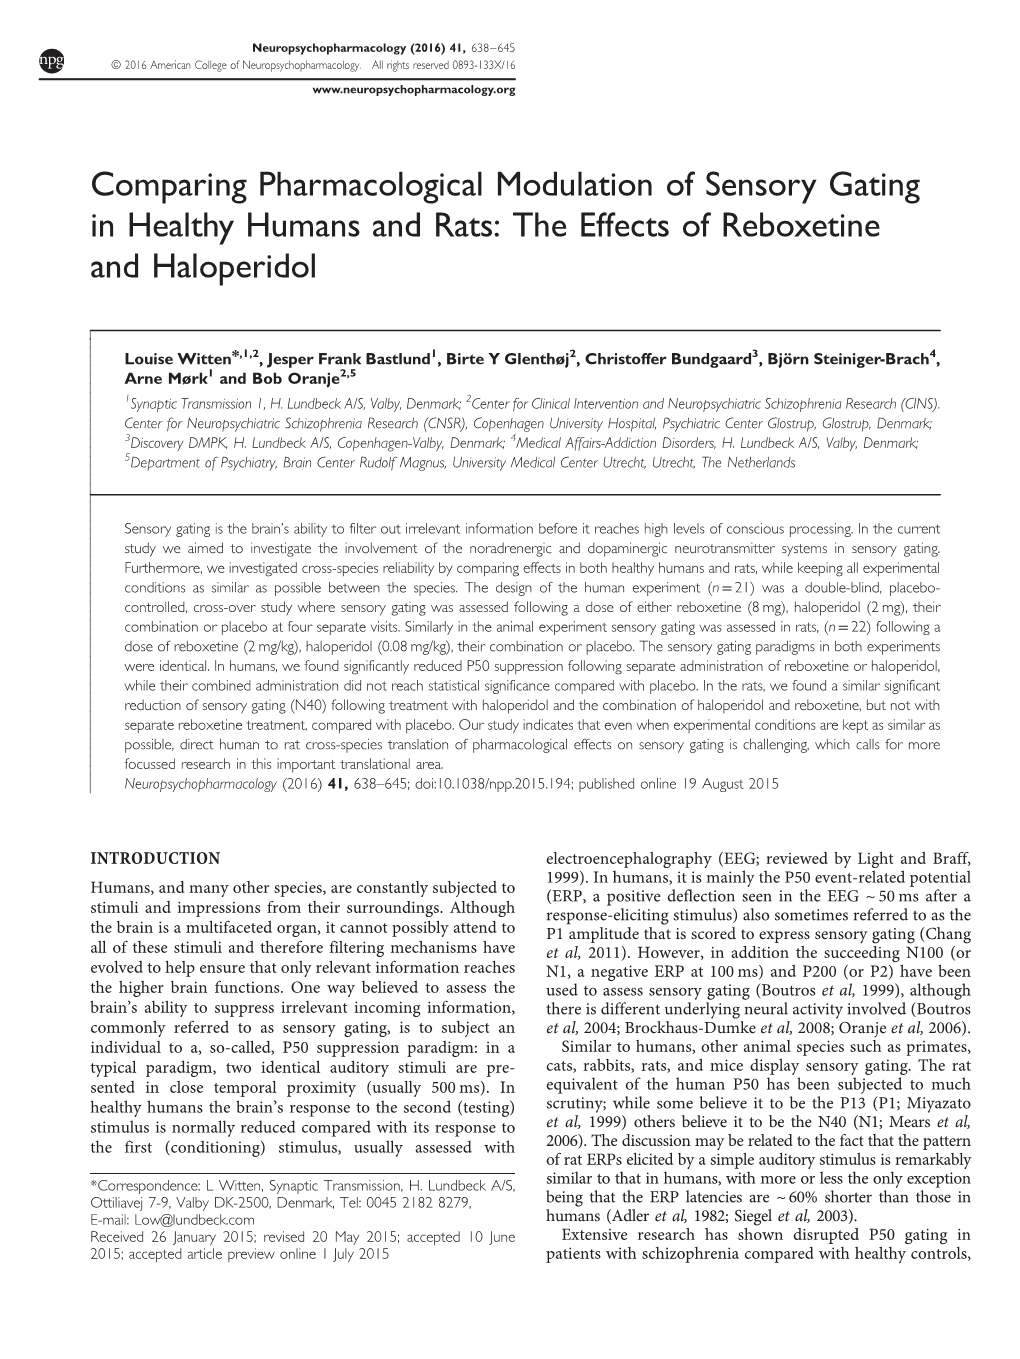 Comparing Pharmacological Modulation of Sensory Gating in Healthy Humans and Rats: the Effects of Reboxetine and Haloperidol